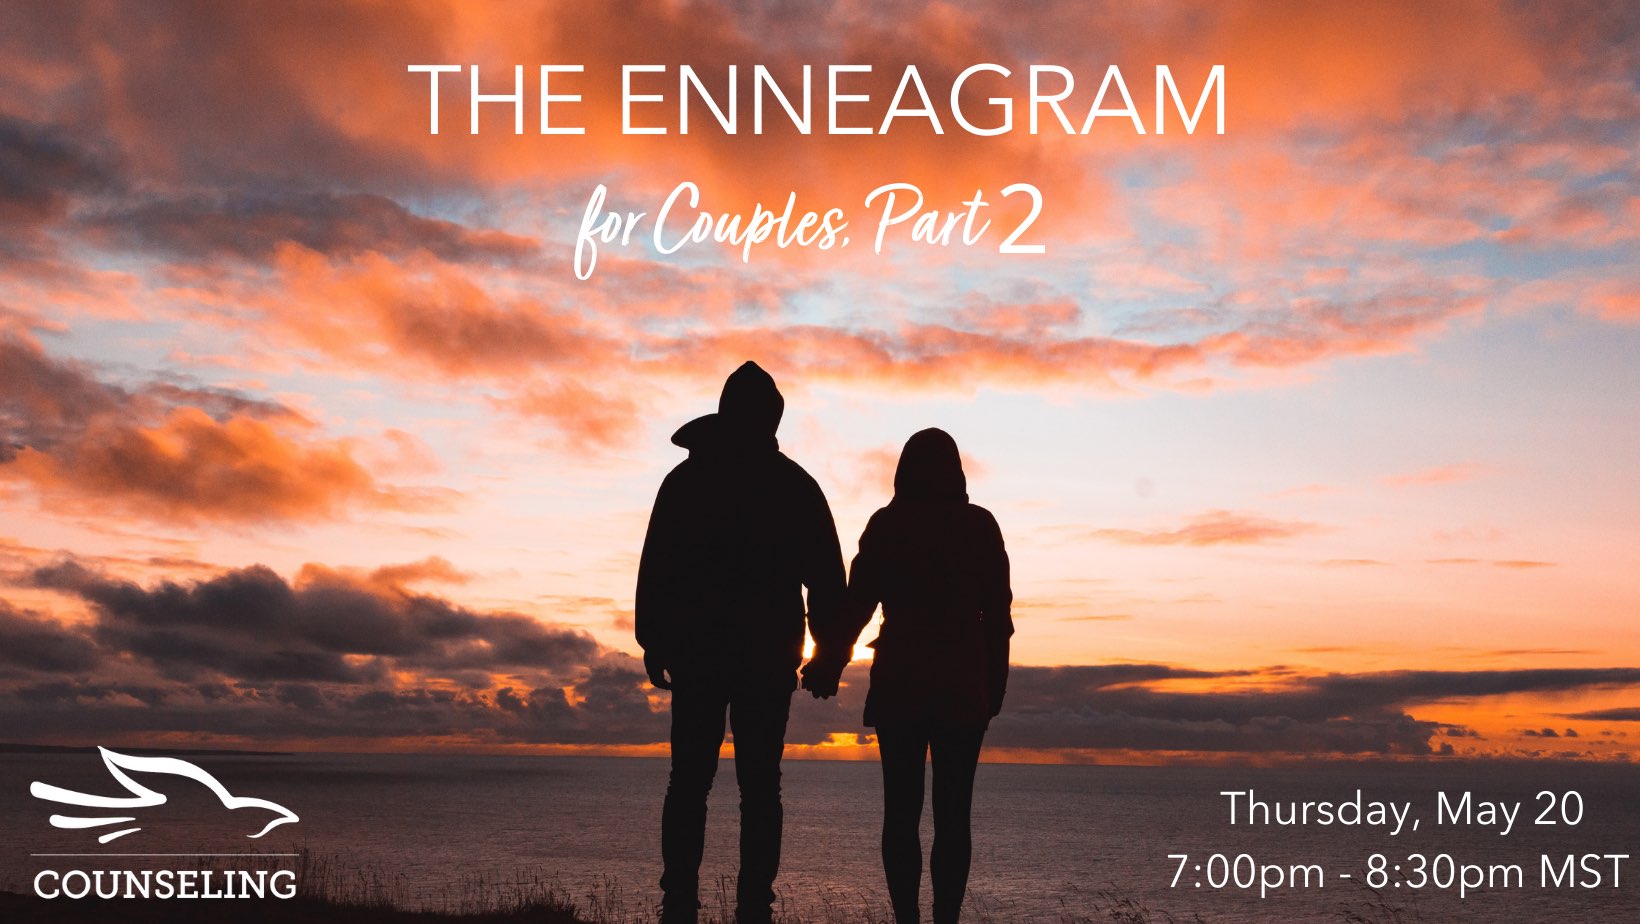 The Enneagram for Couples - Christian Center of Park City - Mary Wright